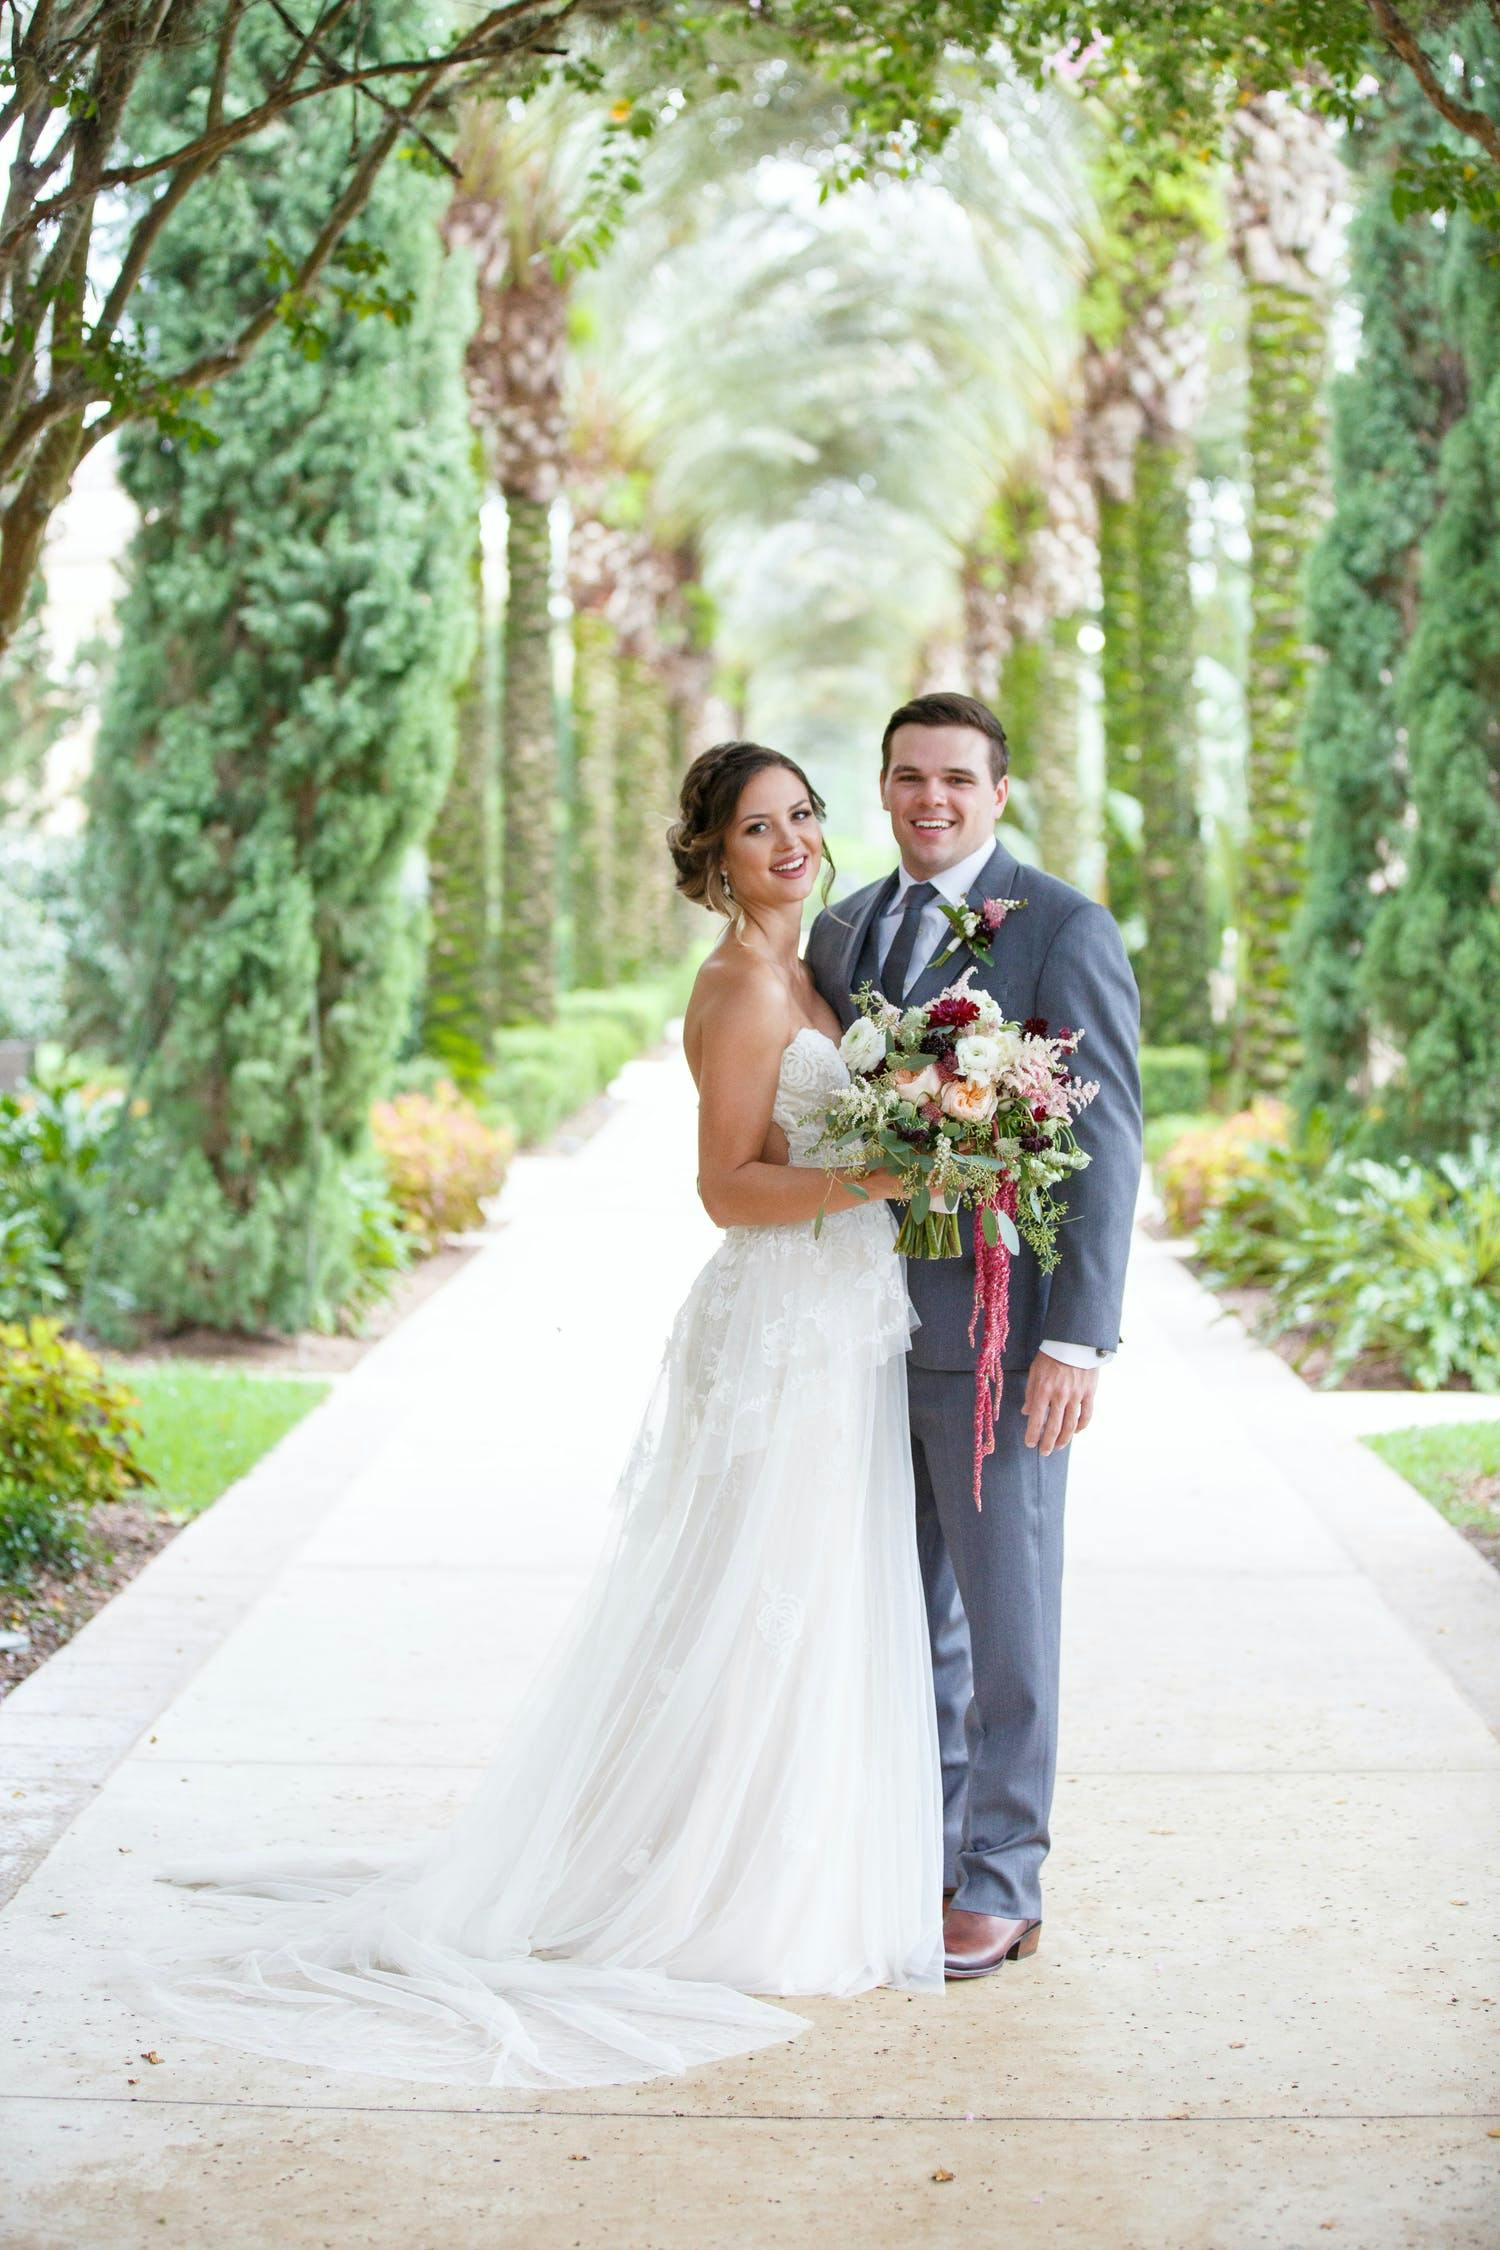 BRIDE AND GROOM OUTSIDE AT FOUR SEASONS ORLANDO AT WALT DISNEY WORLD® RESORT WITH LUSH BACKGROUND | PARTYSLATE